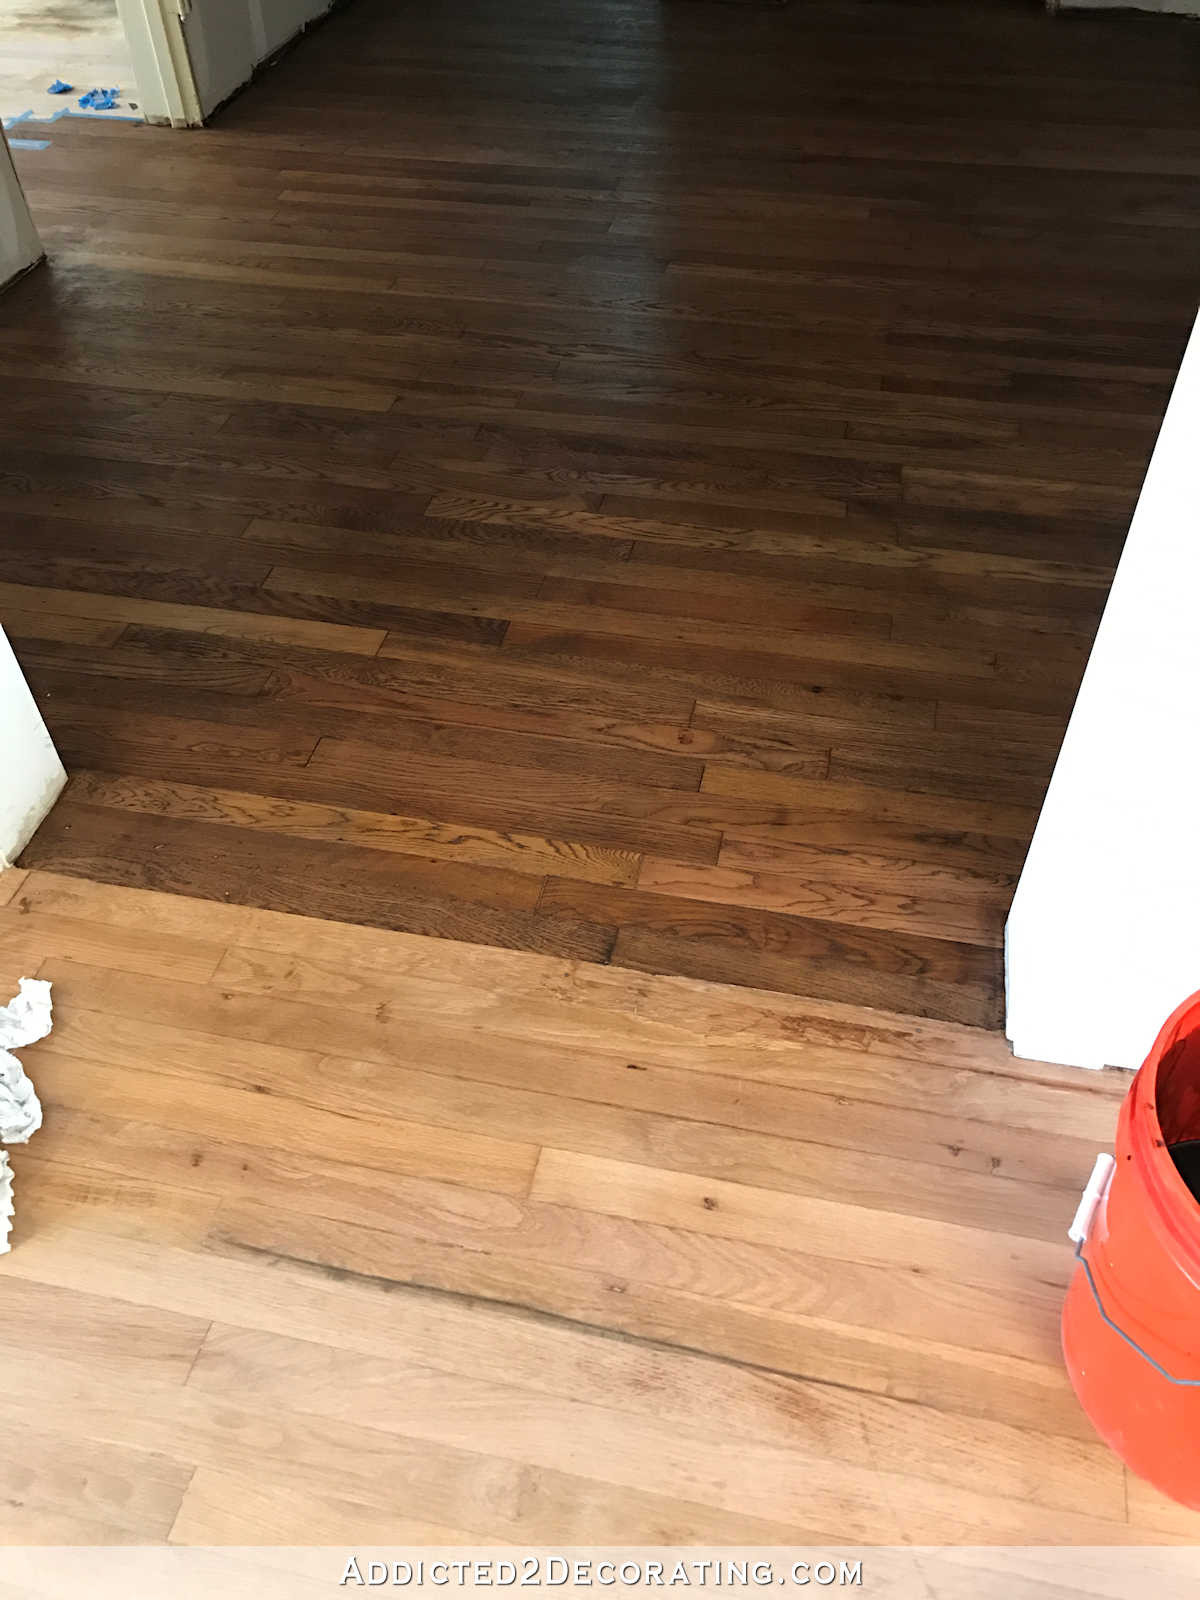 30 Fantastic Hardwood Floor Cleaning solution 2024 free download hardwood floor cleaning solution of adventures in staining my red oak hardwood floors products process for staining red oak hardwood floors 2 tape off one section at a time for